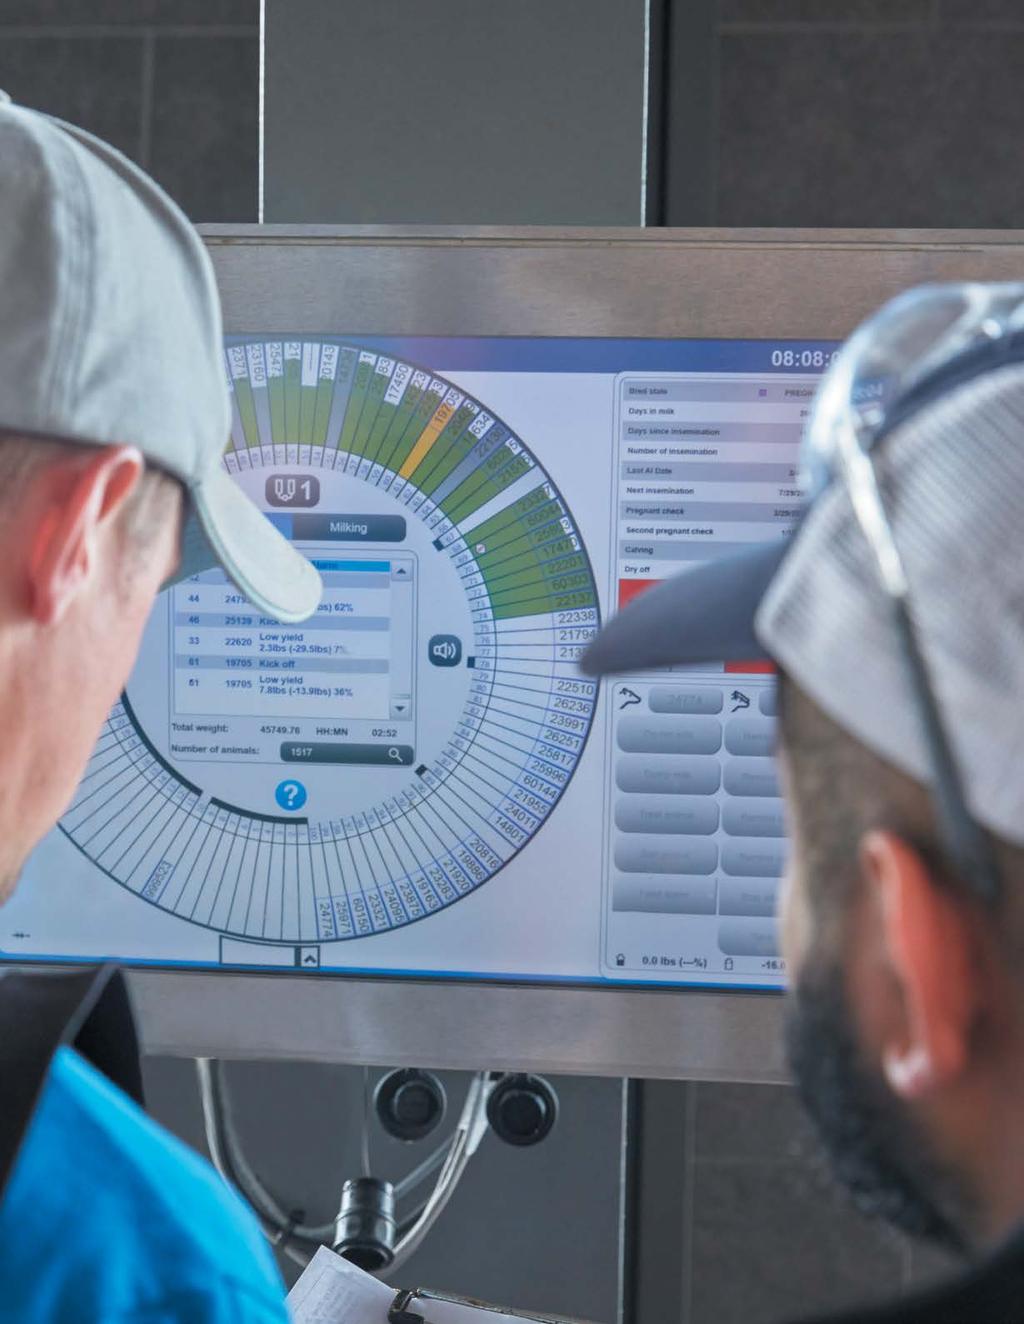 Scheduled Milking System DeLaval DelPro Interactive Data Display If you operate a scheduled milking system, DelPro Interactive Data Display gives you total visibility of every cow as she makes her